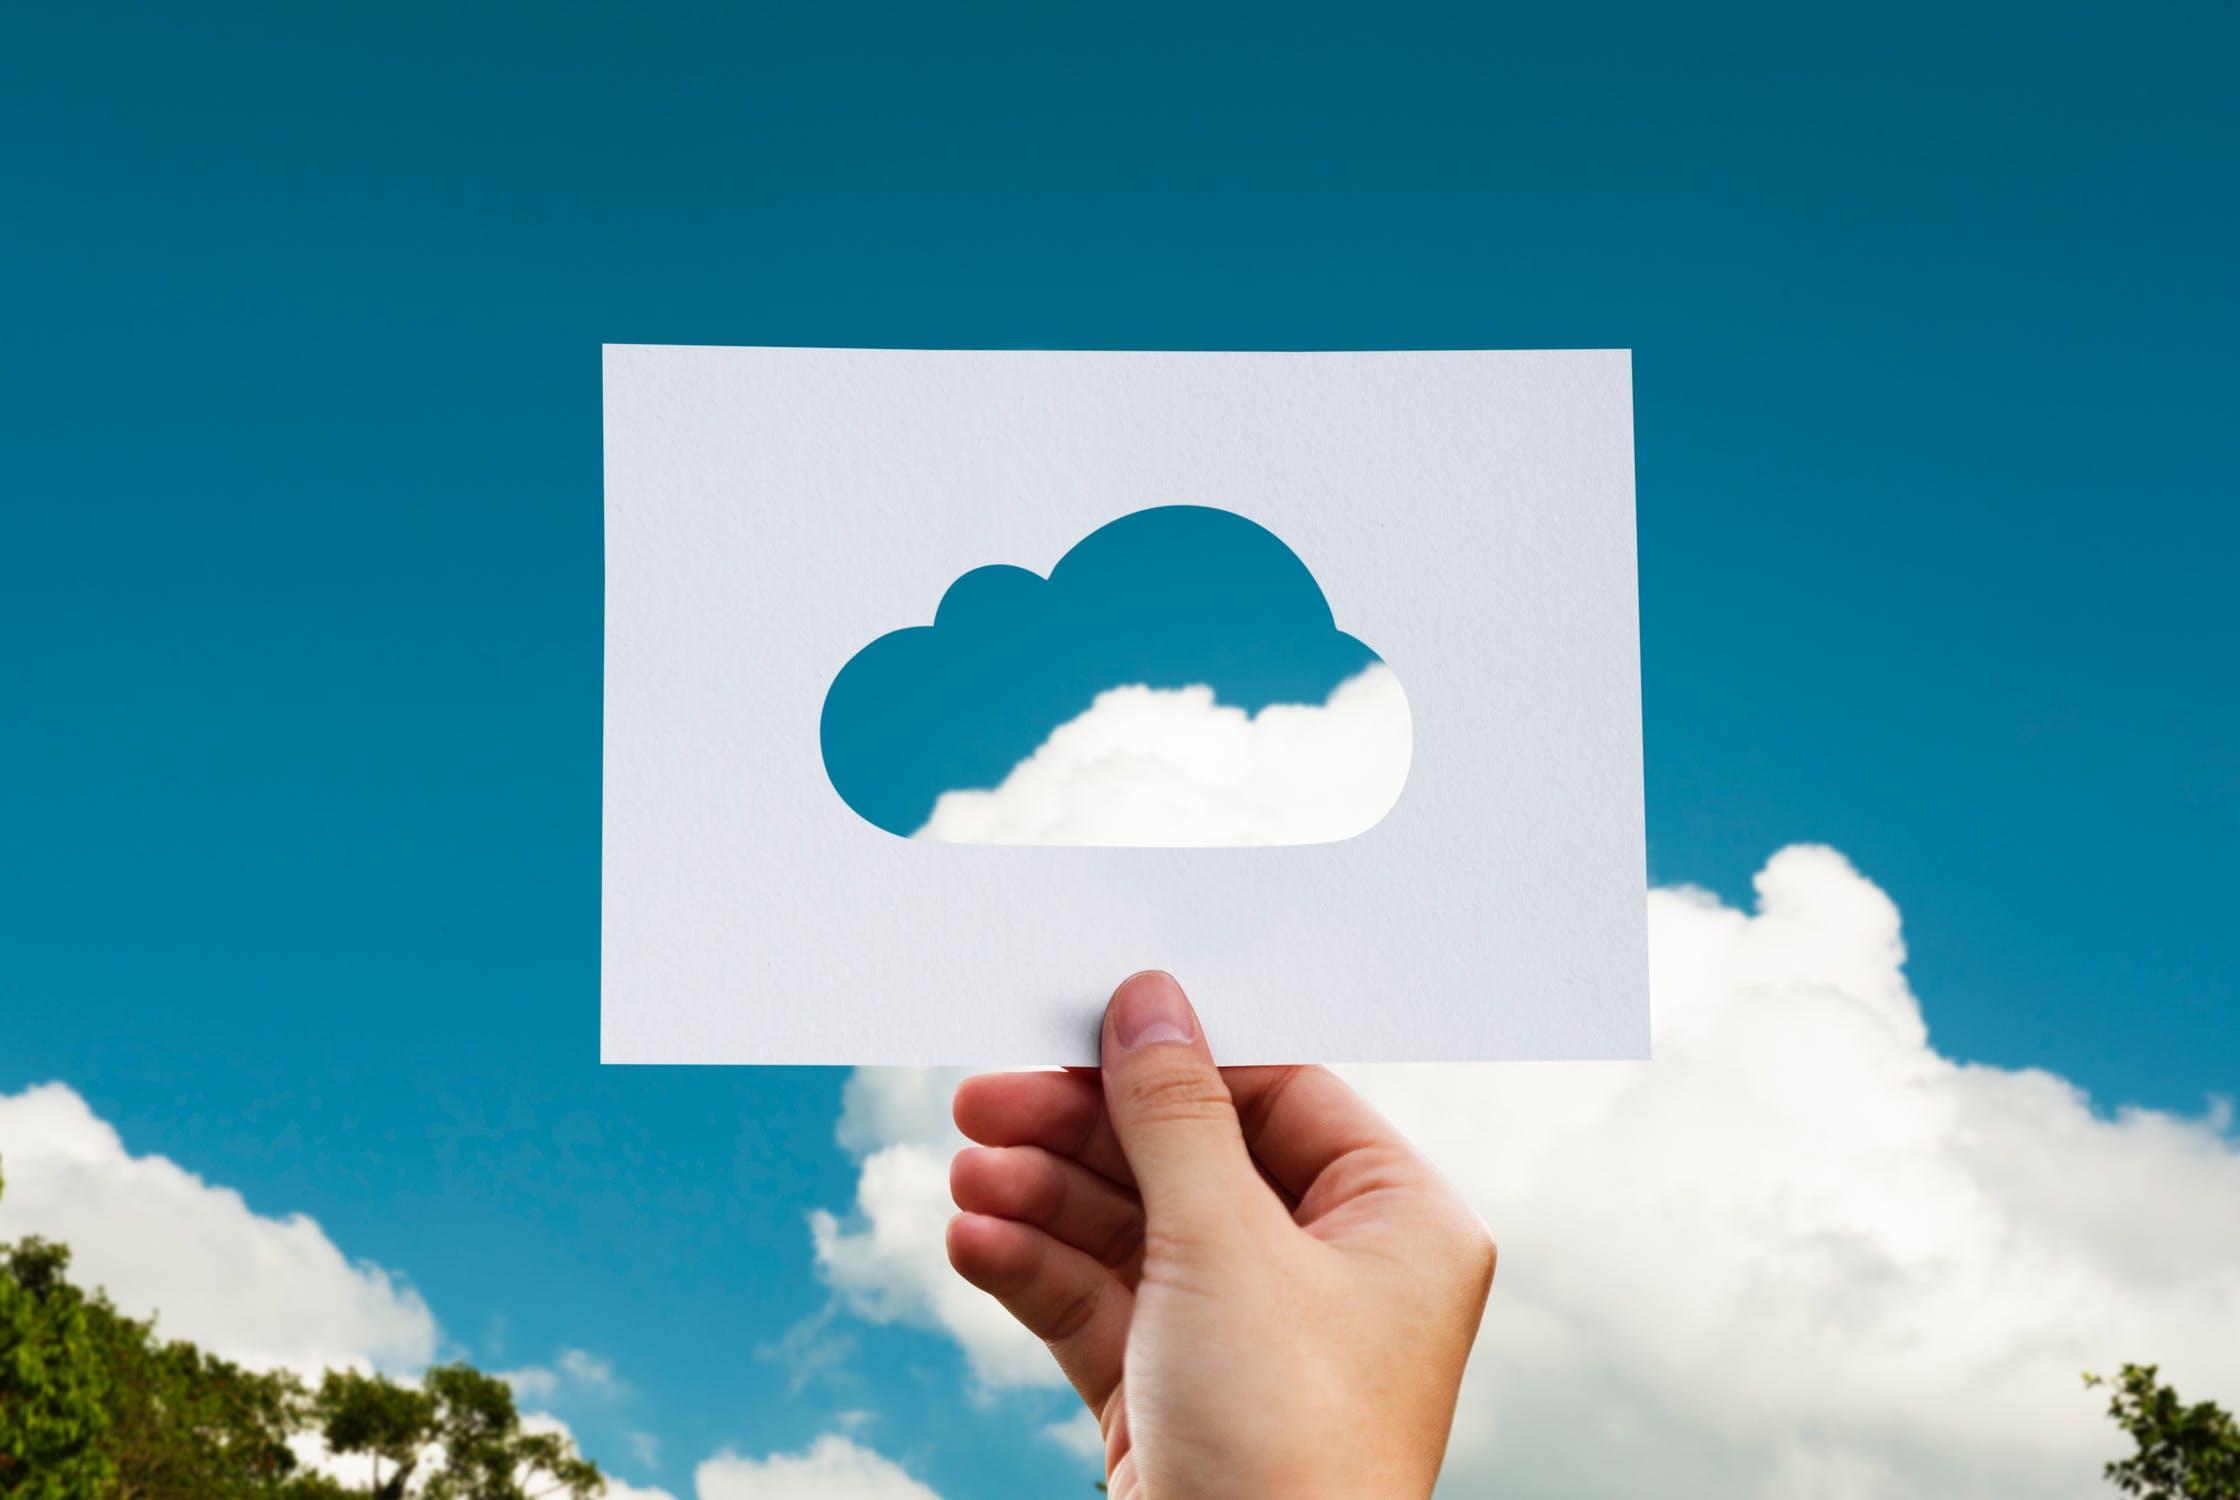 How Often is the Public Cloud Being Used by Enterprises?